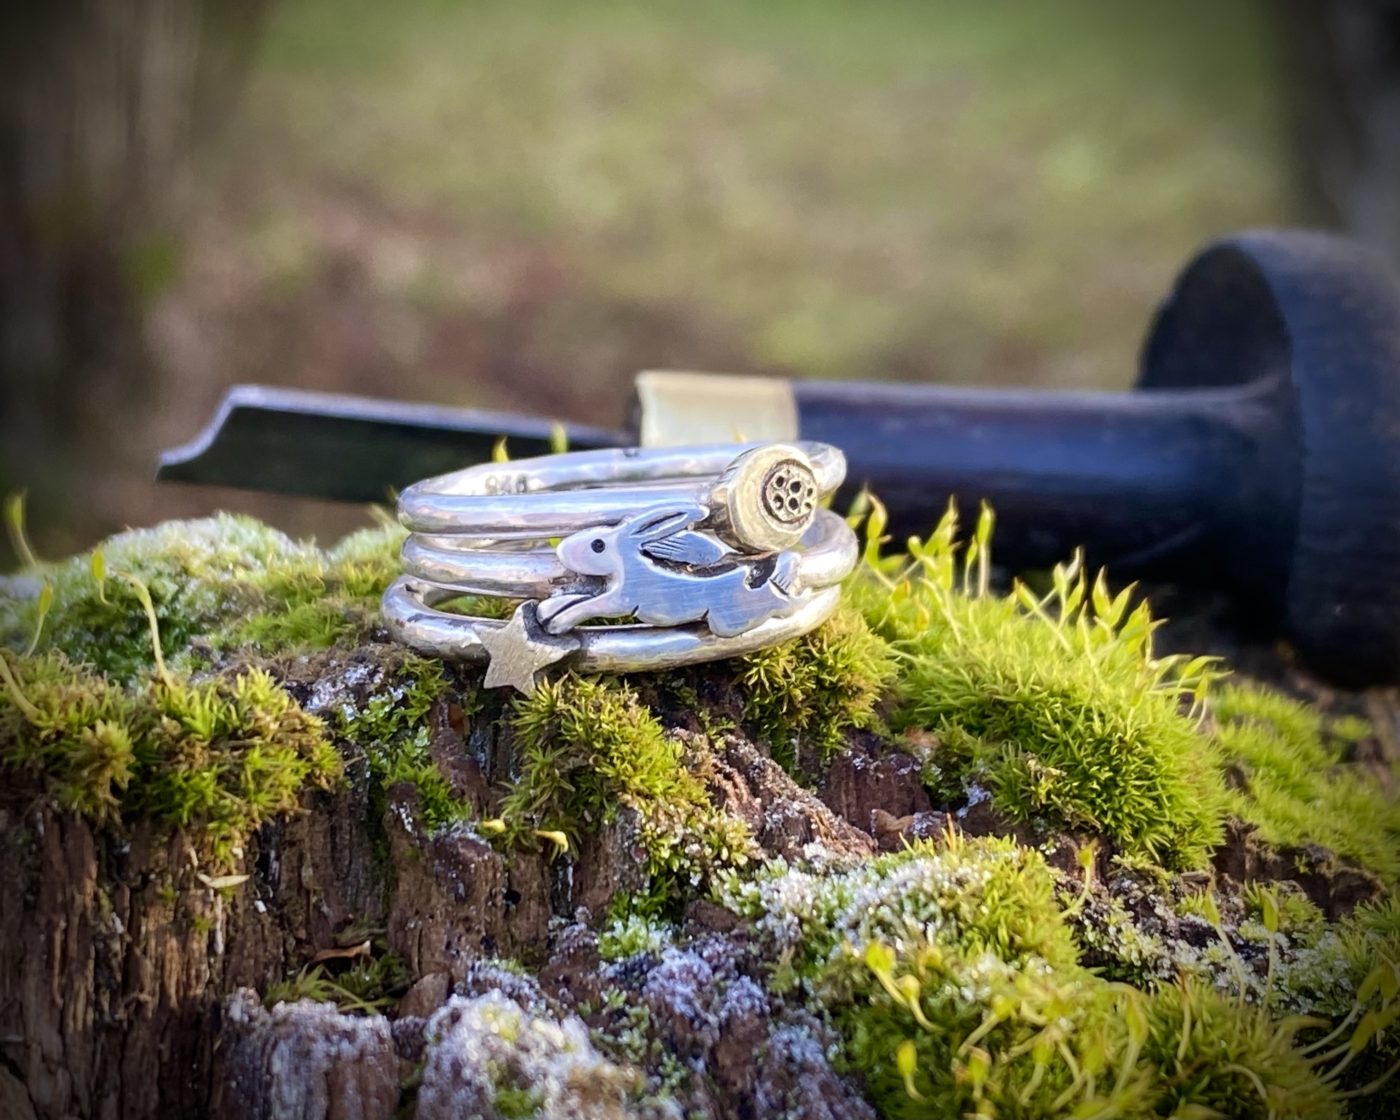 handmade leaping hare ring eco conscious, ethical, renewable, green jewellery made in Cambridge by local artisan jeweller with hand tools and love